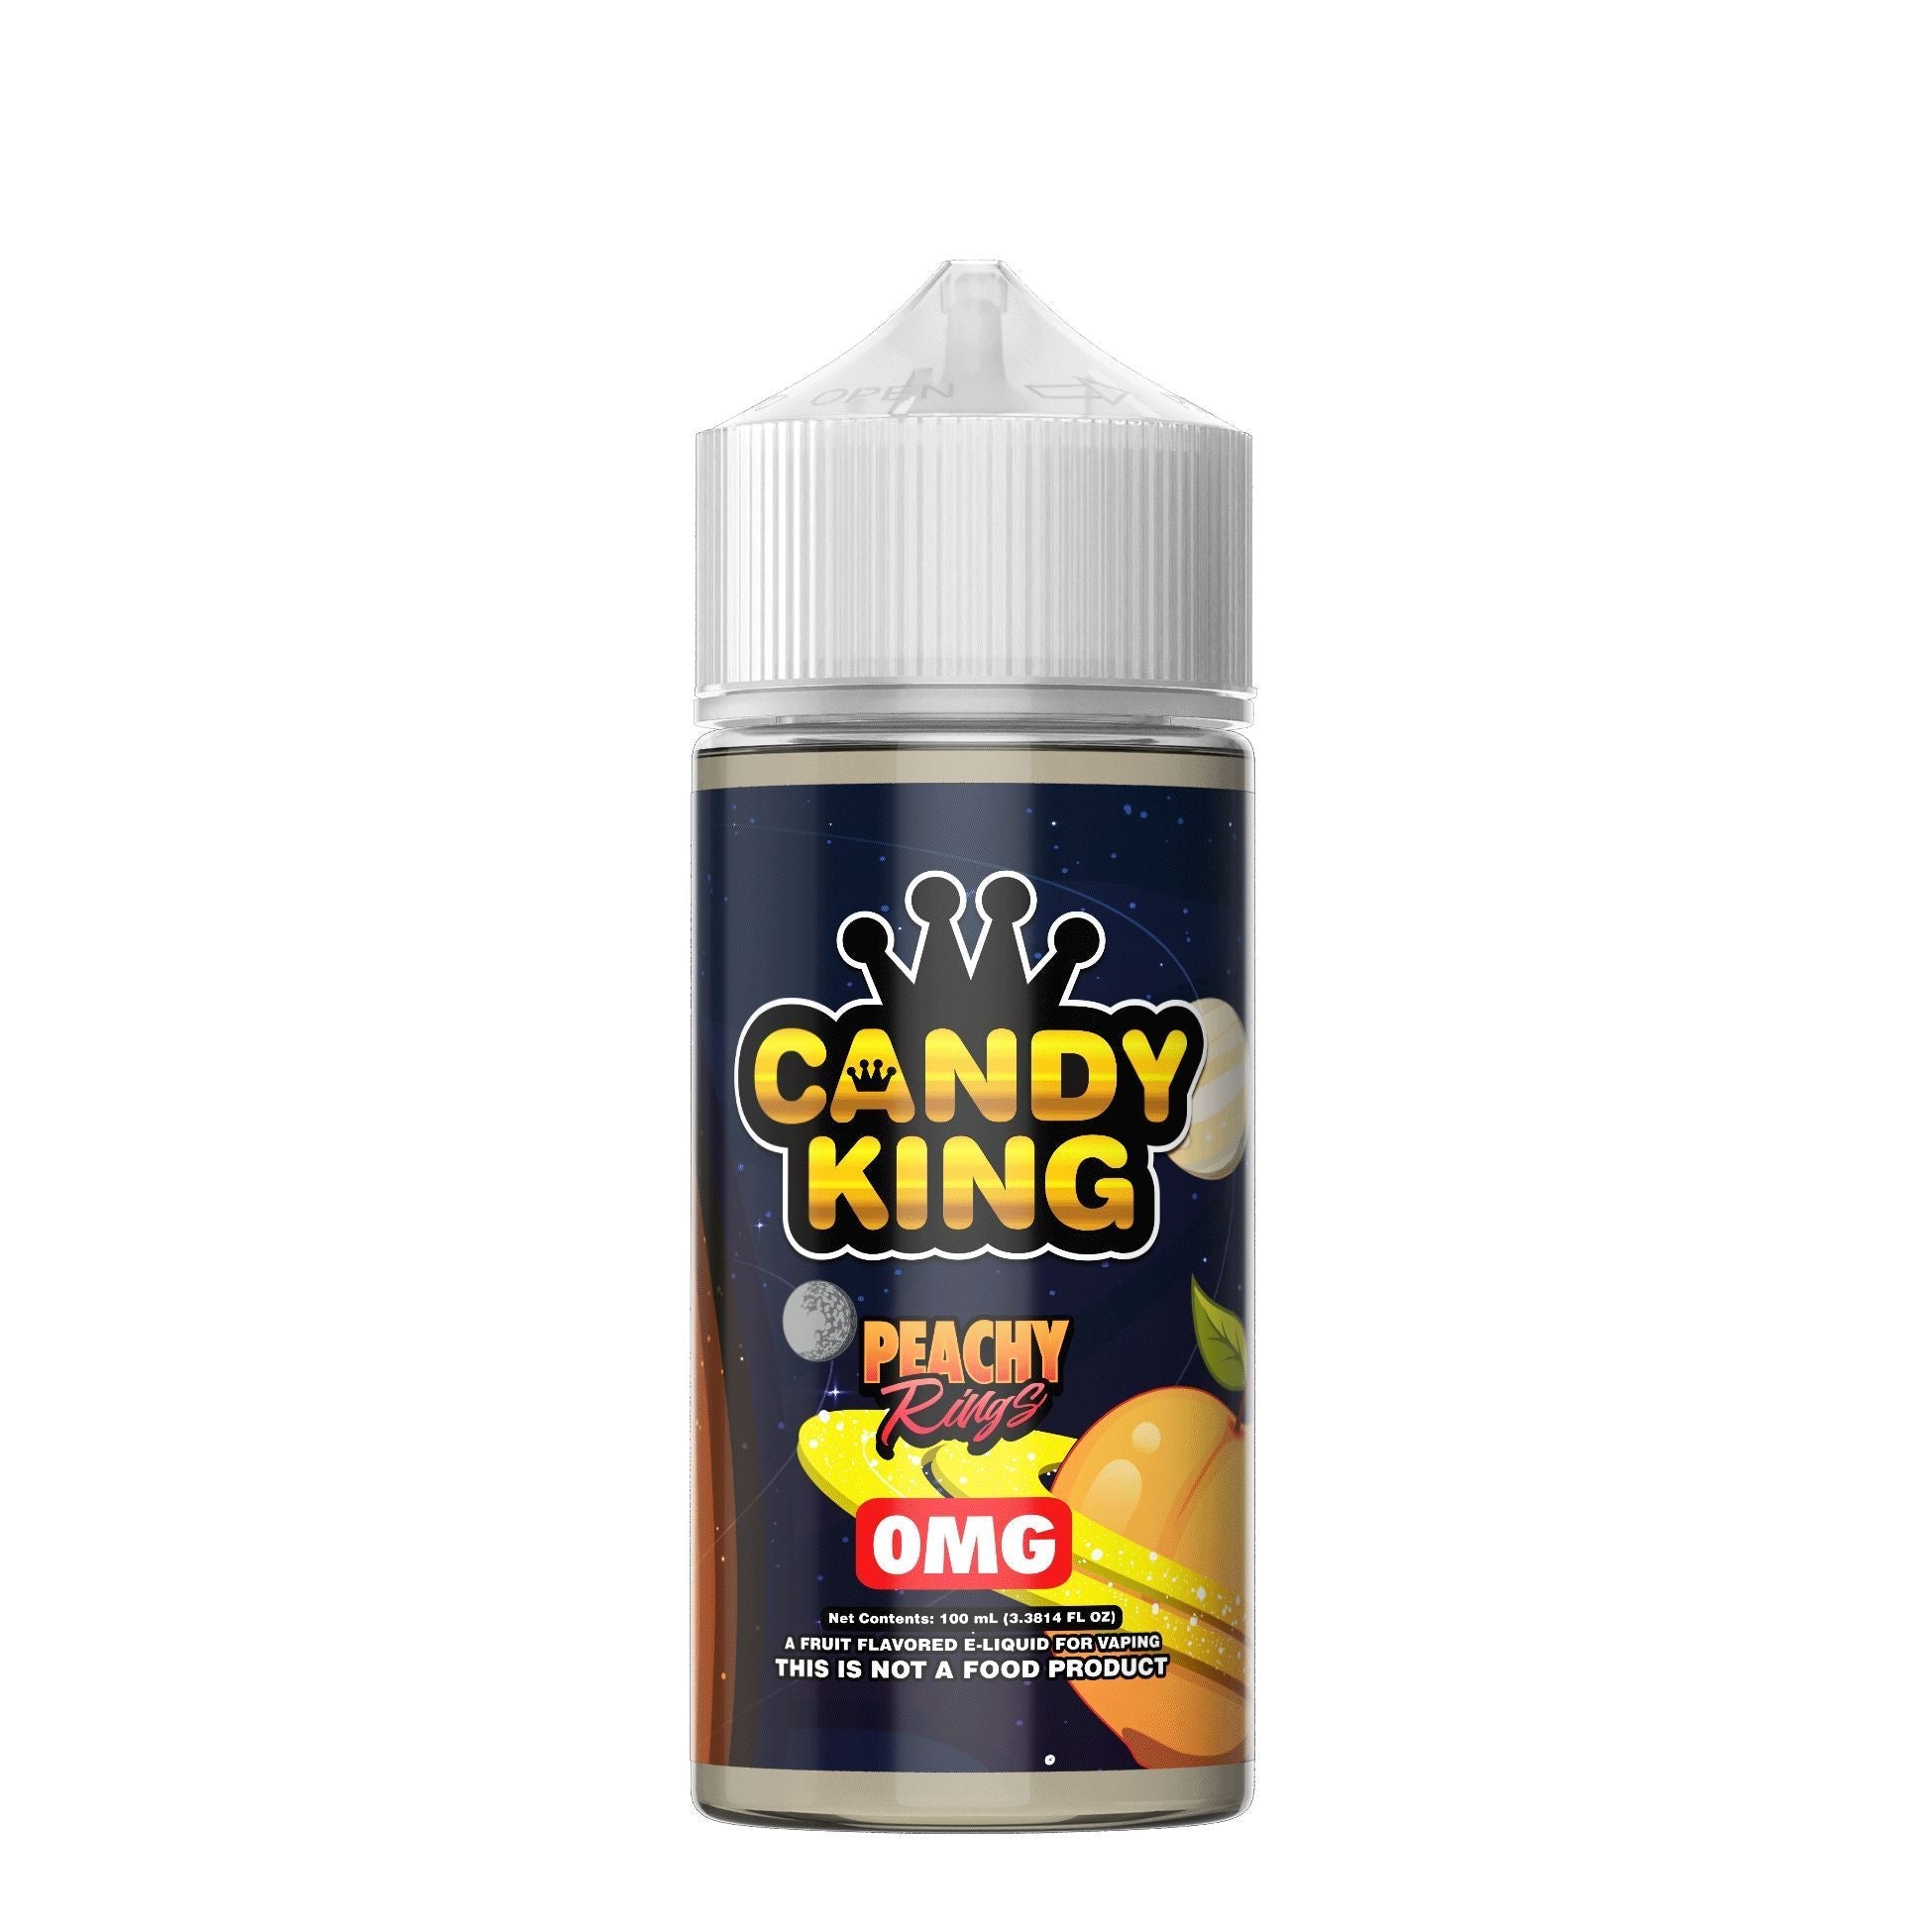 Buy Peachy Rings by Candy King - Wick And Wire Co Melbourne Vape Shop, Victoria Australia